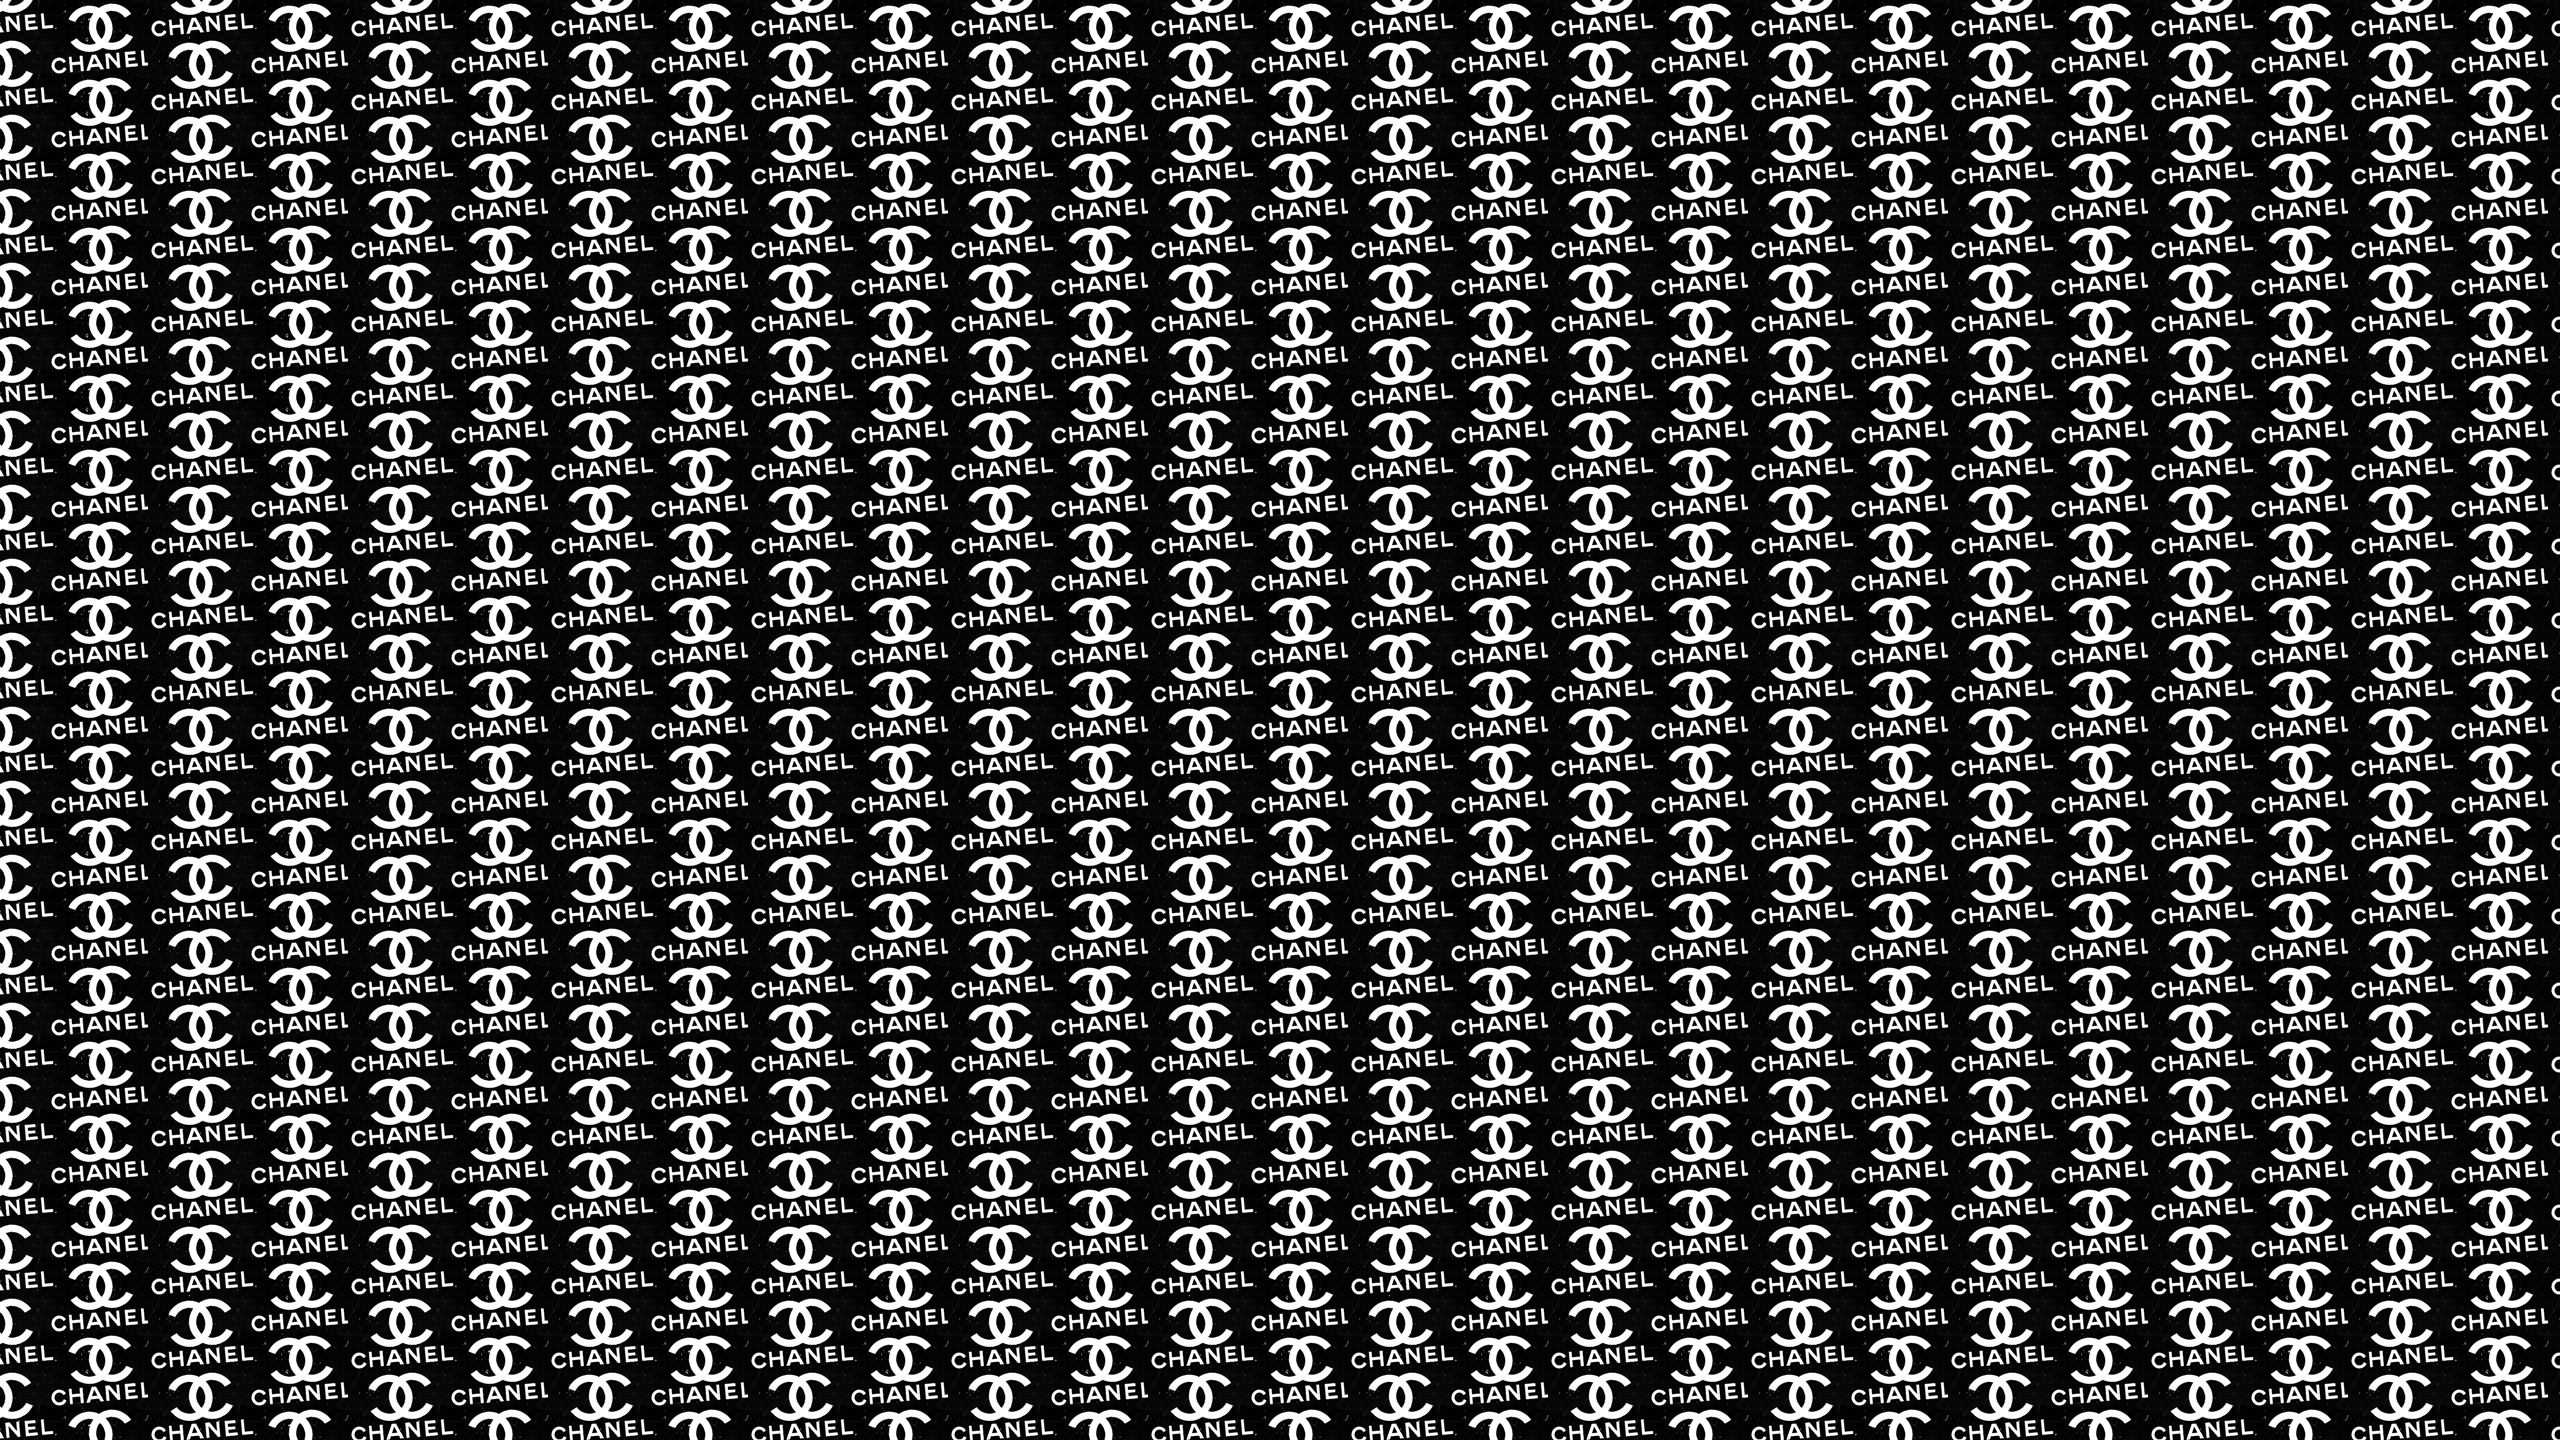 This Chanel Logos Desktop Wallpaper Is Easy Just Save The